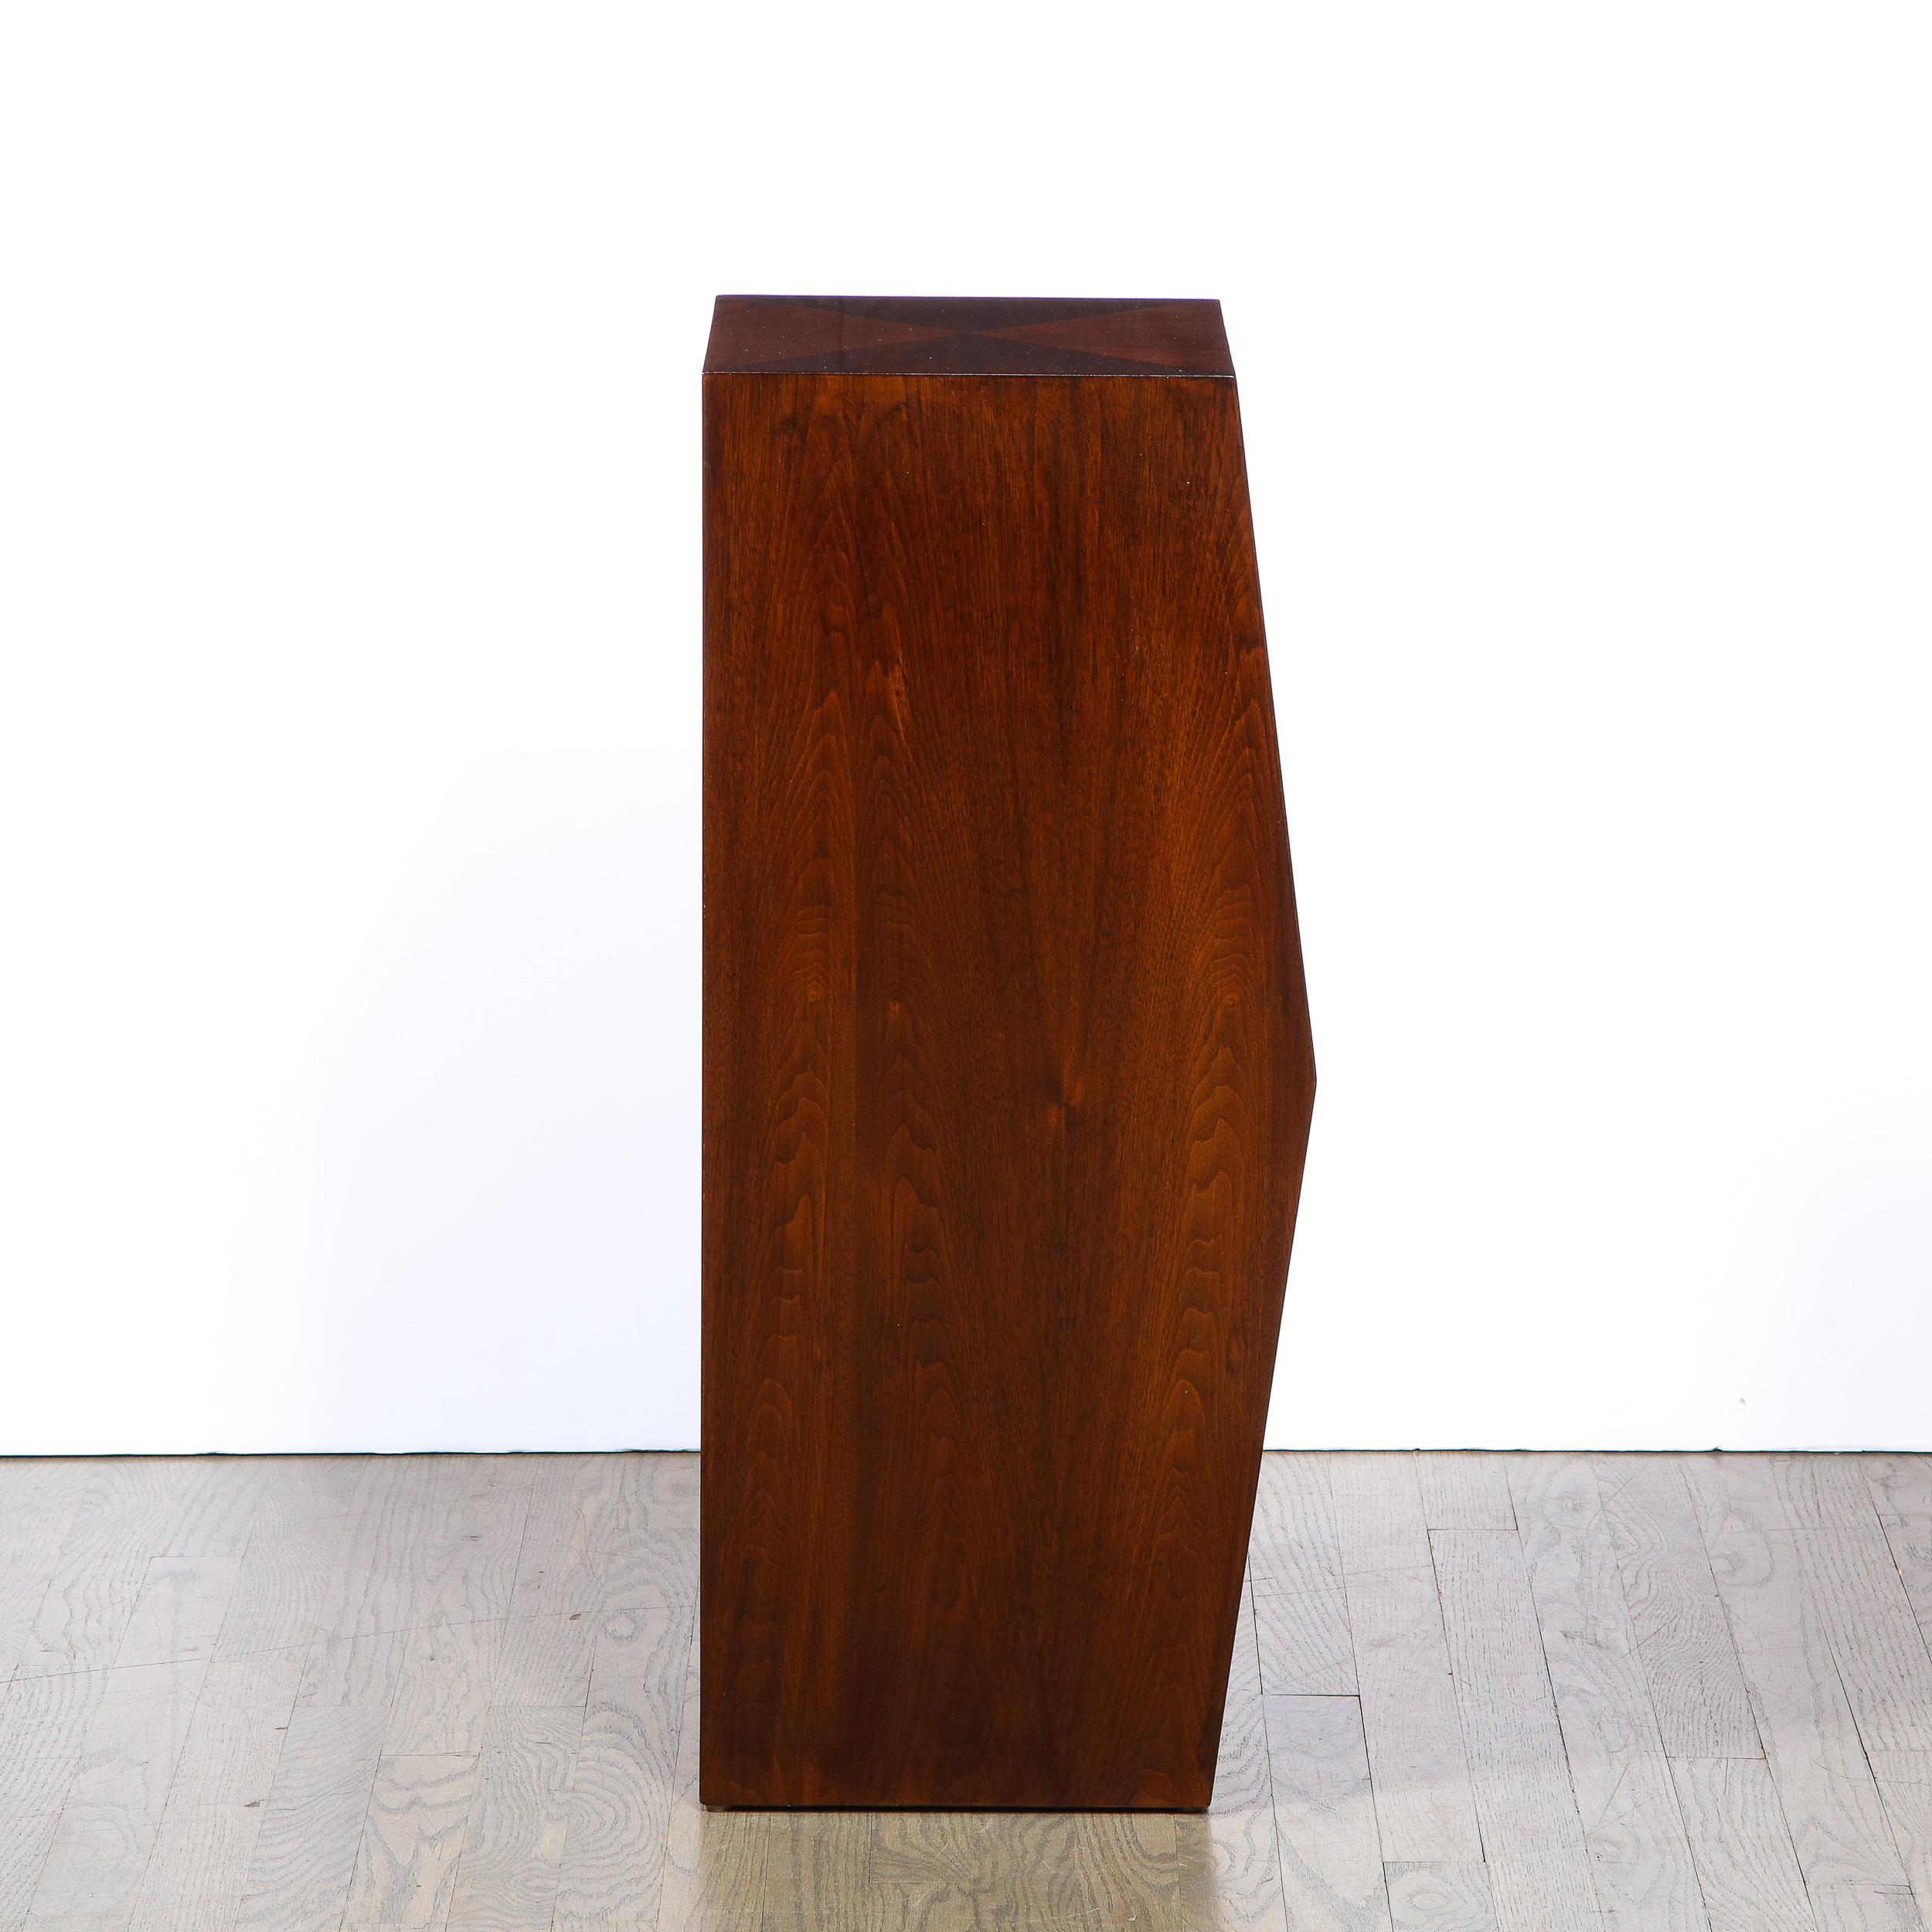 American Modernist Sculptural Bookmatched Walnut Faceted Minimalist Pedestal In Excellent Condition For Sale In New York, NY